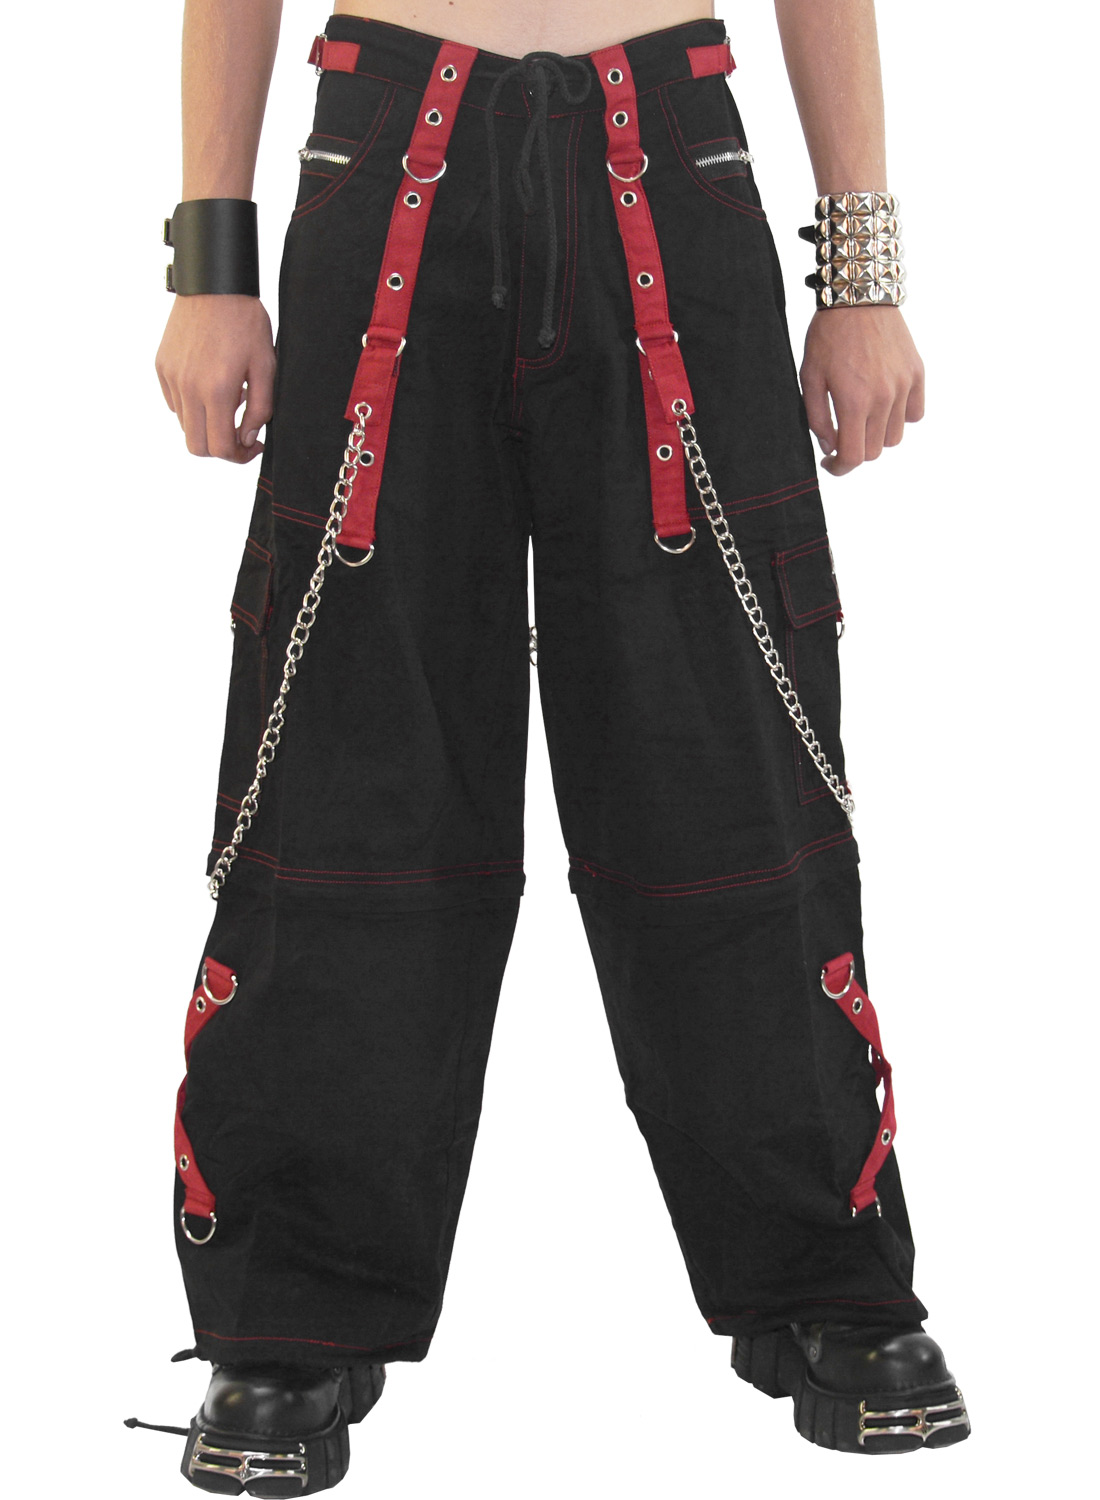 Transformers Trousers Red